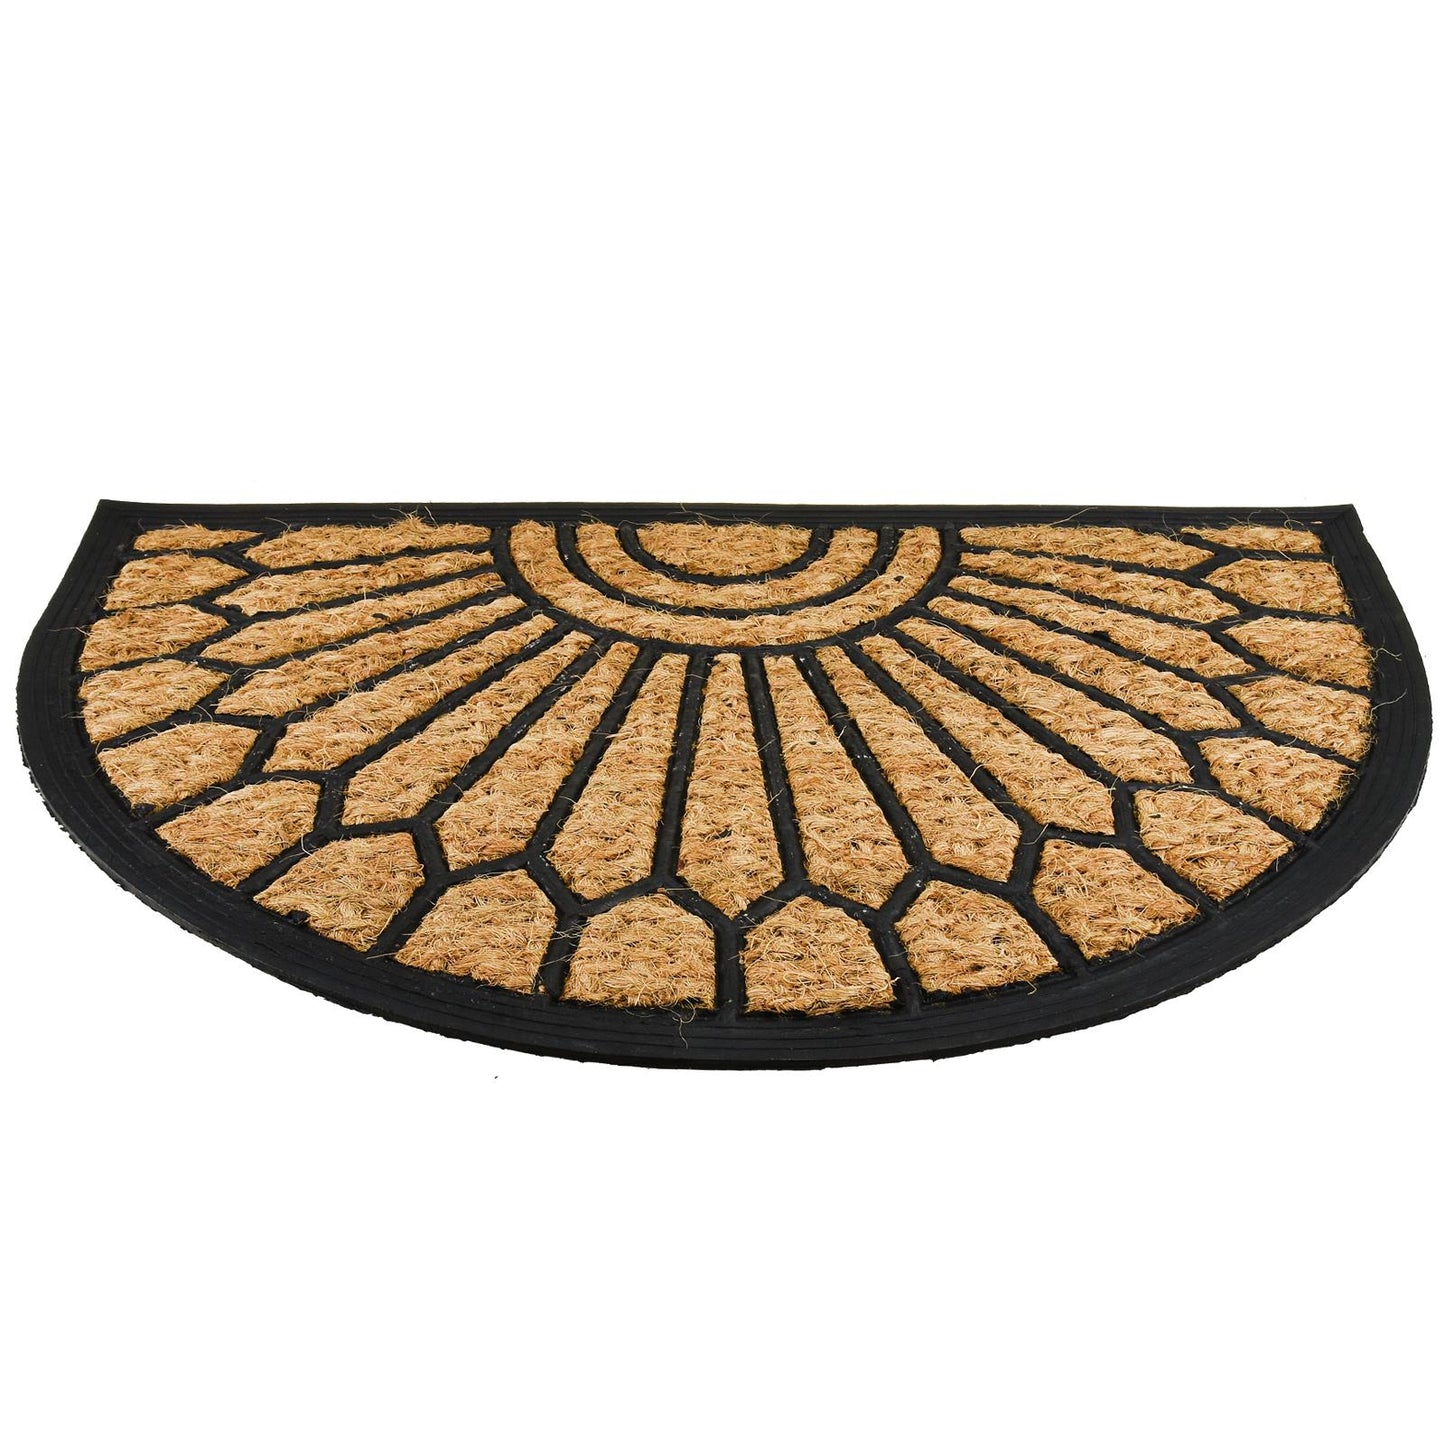 Large Diamond Design Non-Slip Floor Mat For A Safe And Chic Kitchen Or Hallway Décor